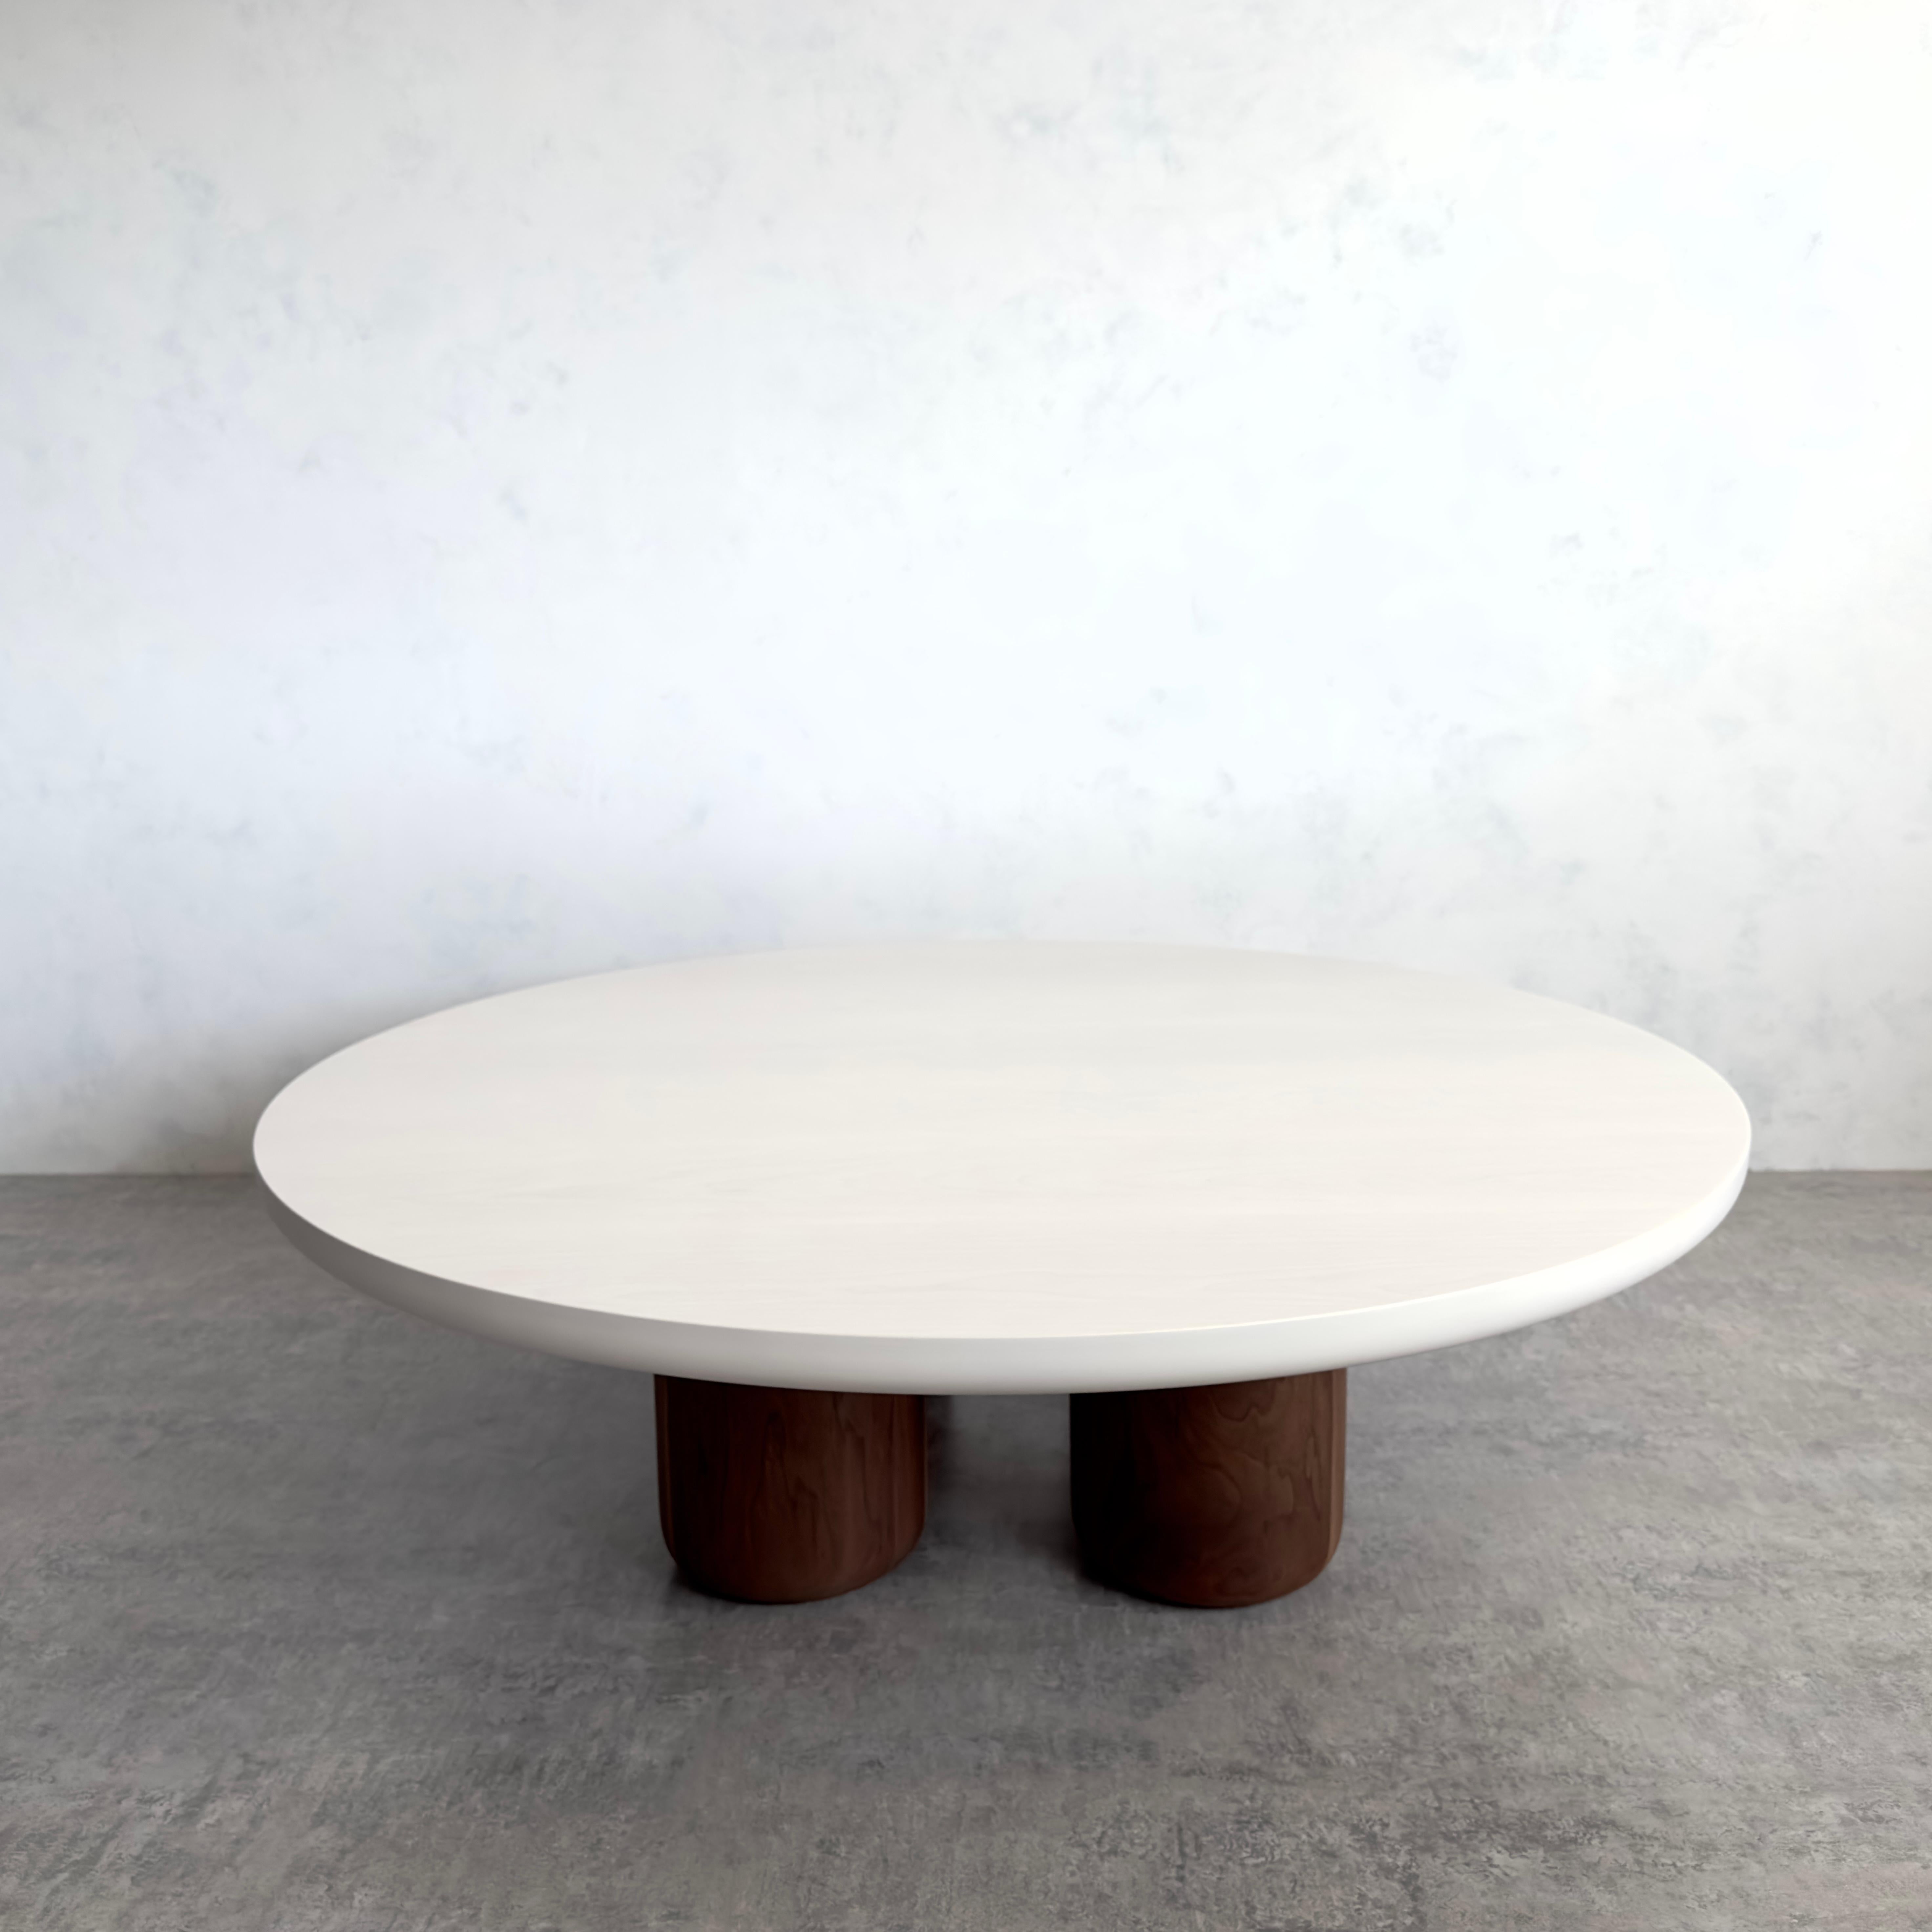 Our Tusker coffee table blends well in modern homes looking for something with a little character. Strong bold and robust with solid walnut legs turned by hand in our Vancouver based studio. Shown here with a whitened maple top and walnut legs with